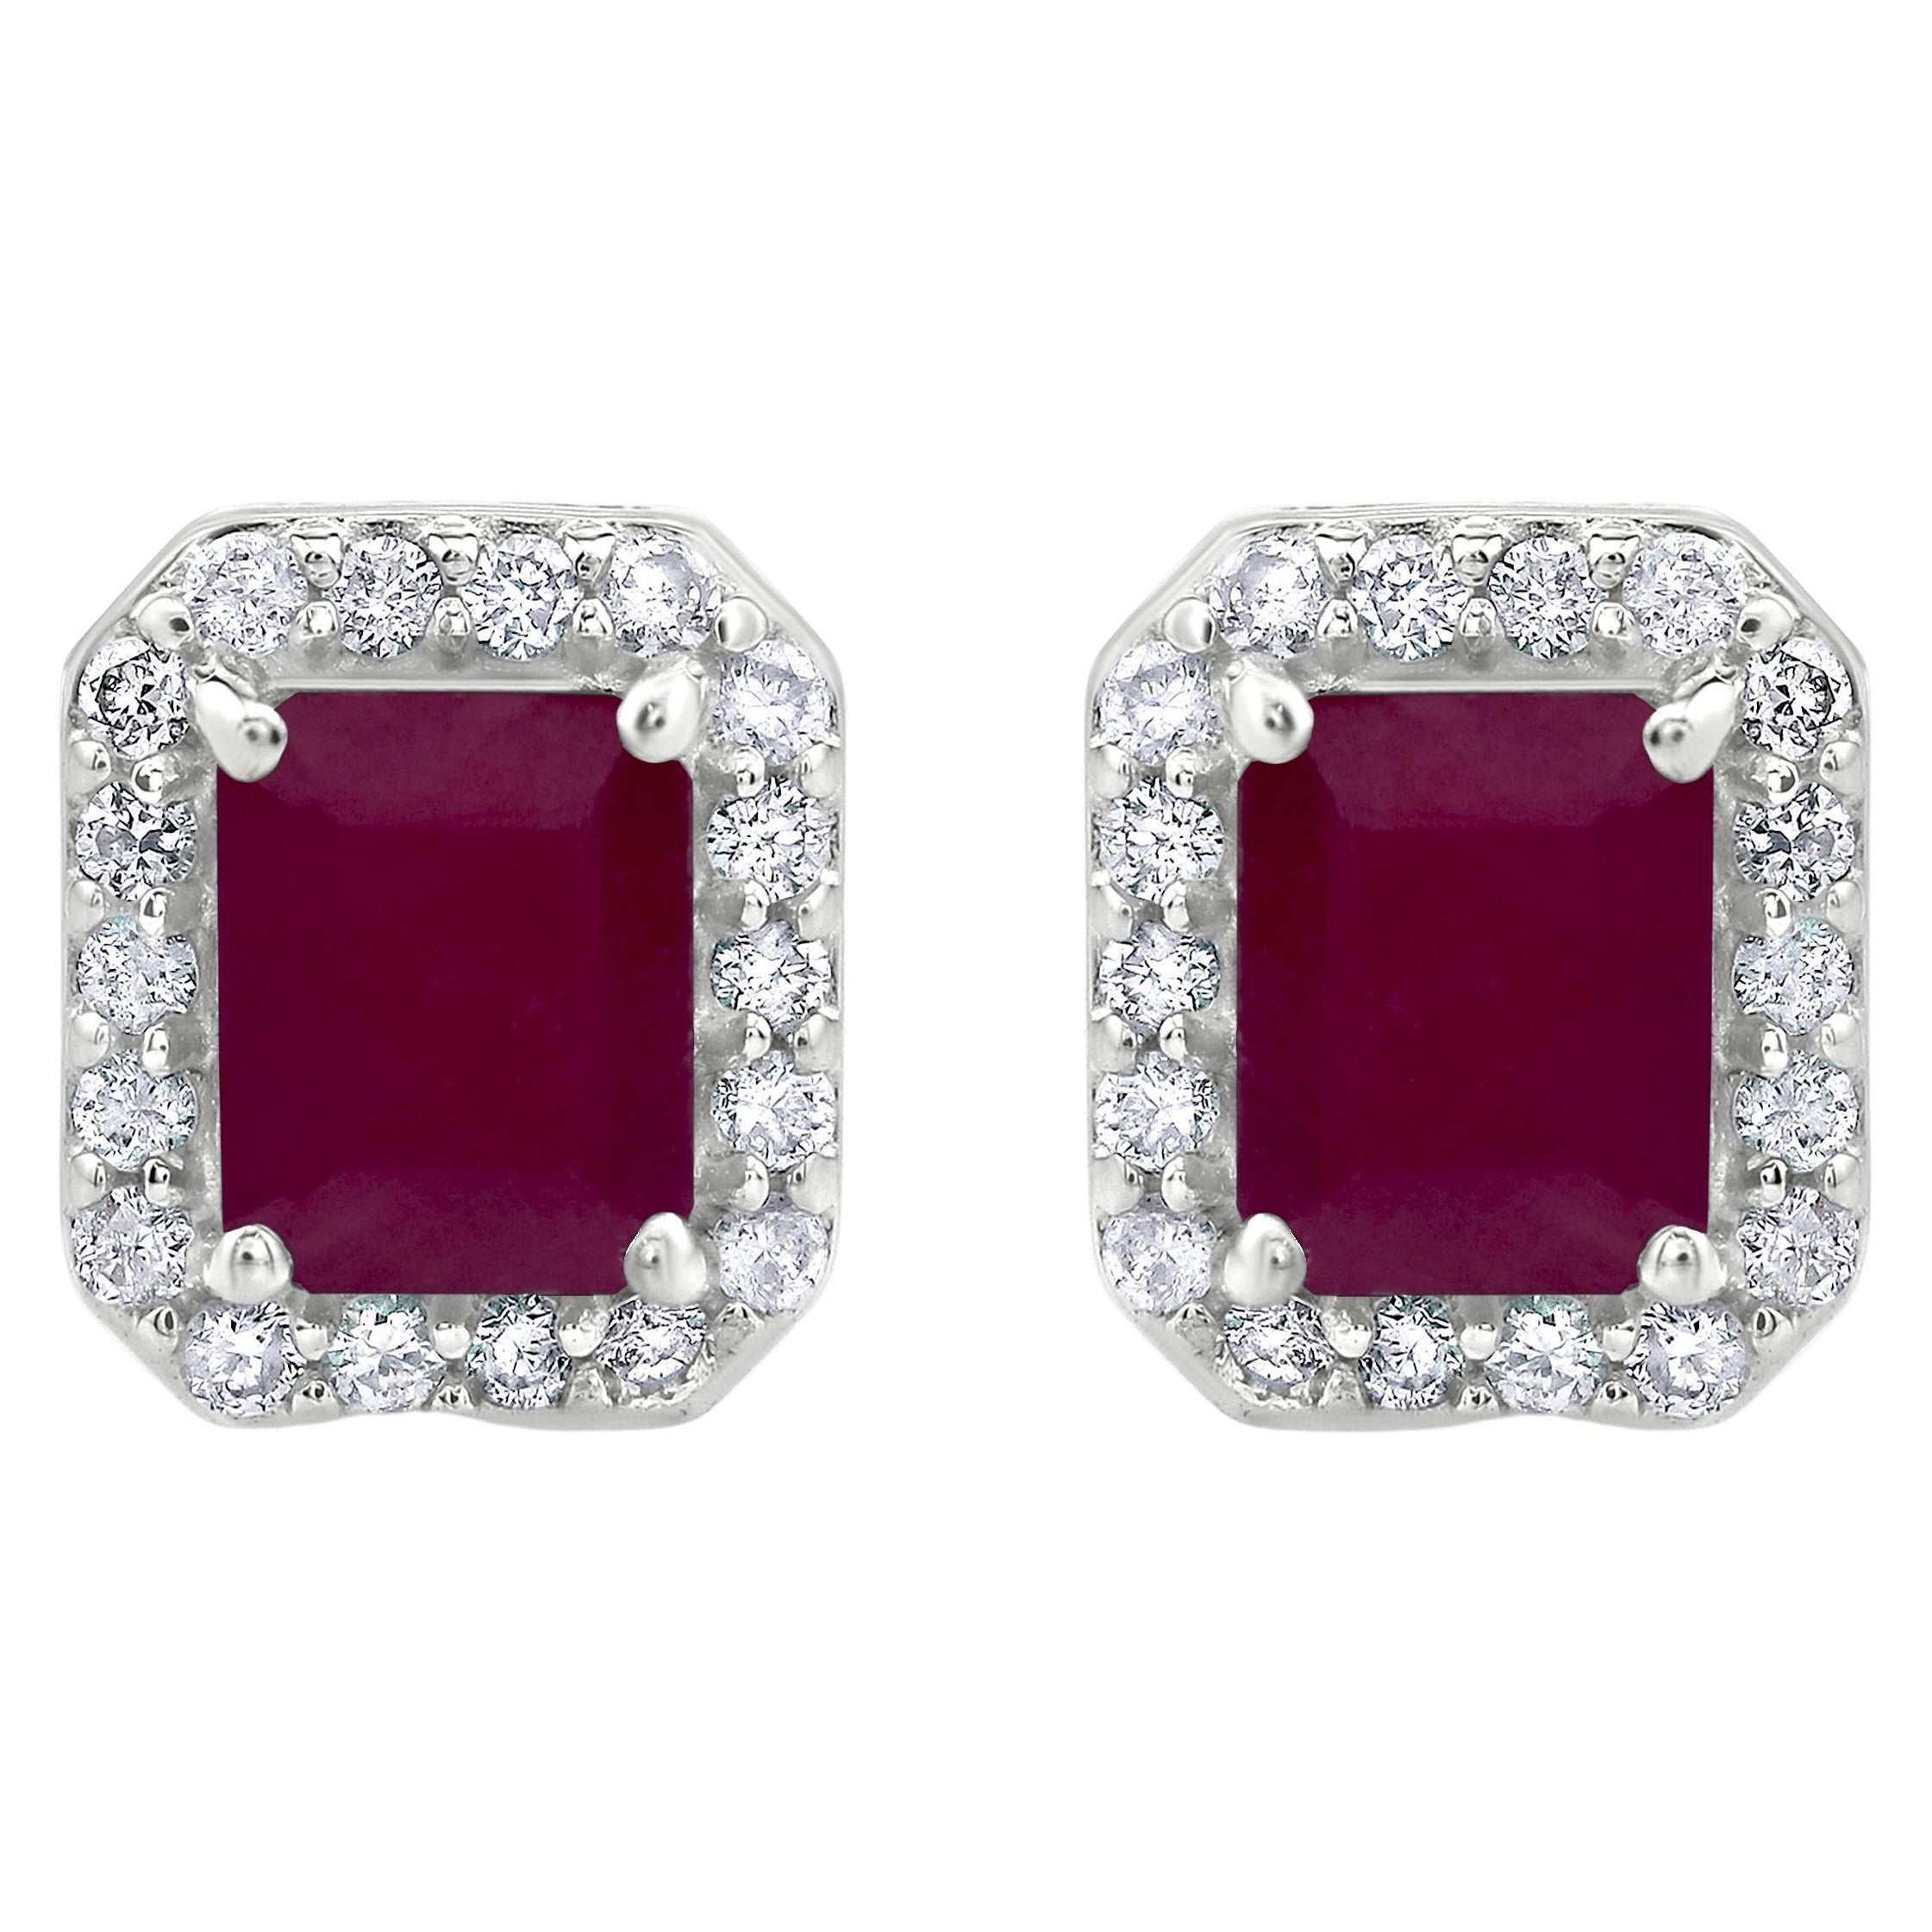 Gemistry 1.45 Carats Octagon Ruby Stud Earrings with Diamond in 14K White Gold For Sale